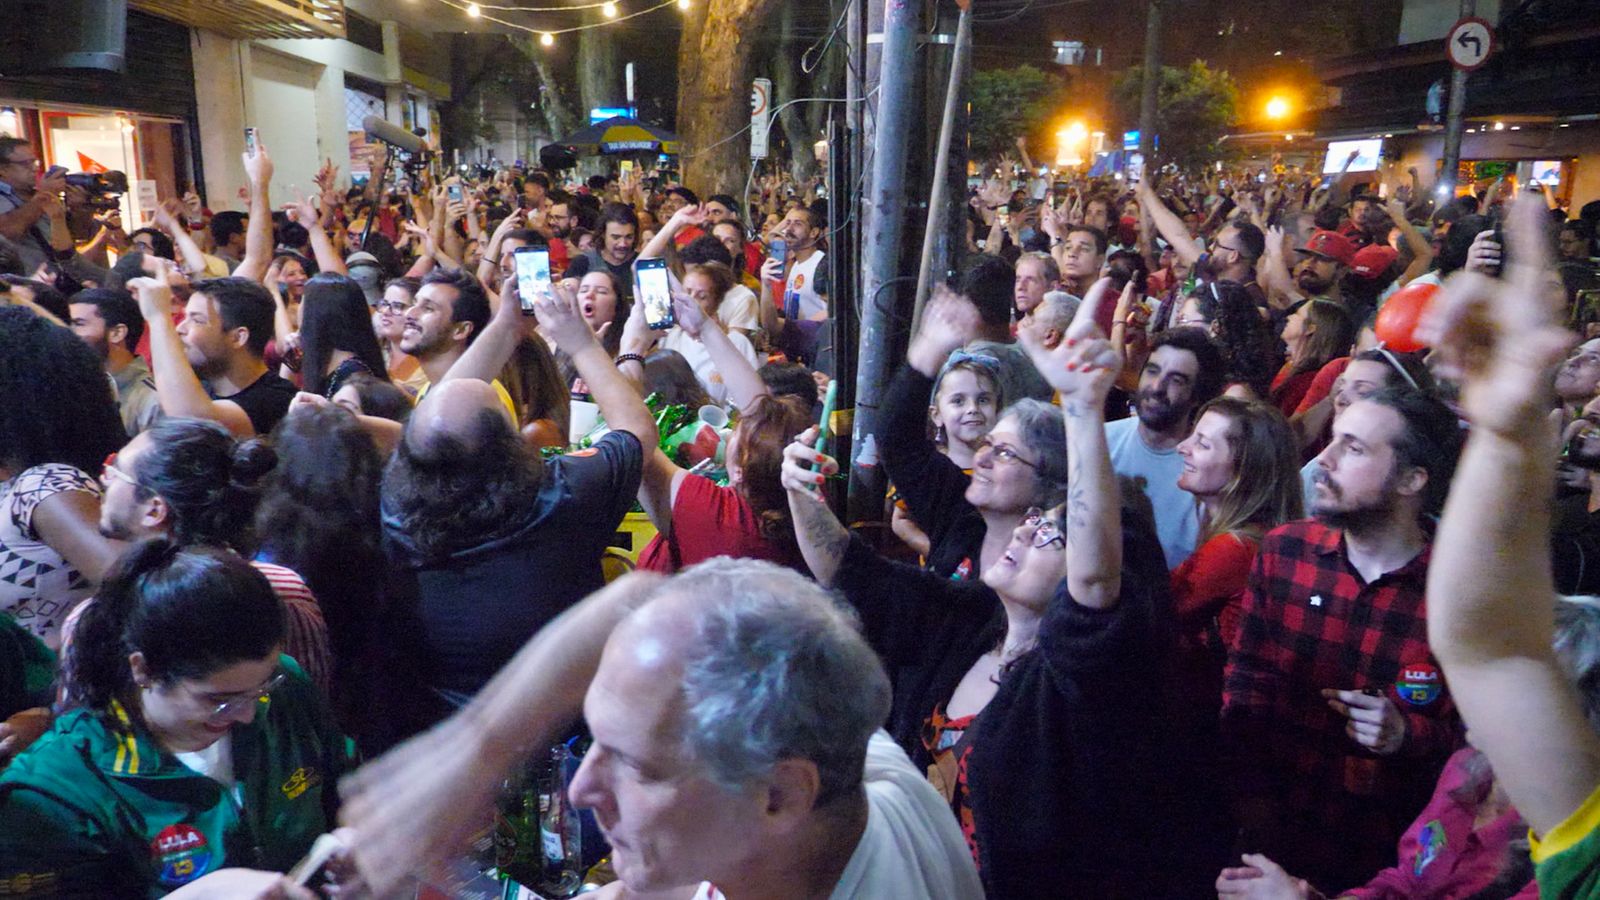 Lula supporters put celebrations on hold after Brazil’s presidential election result